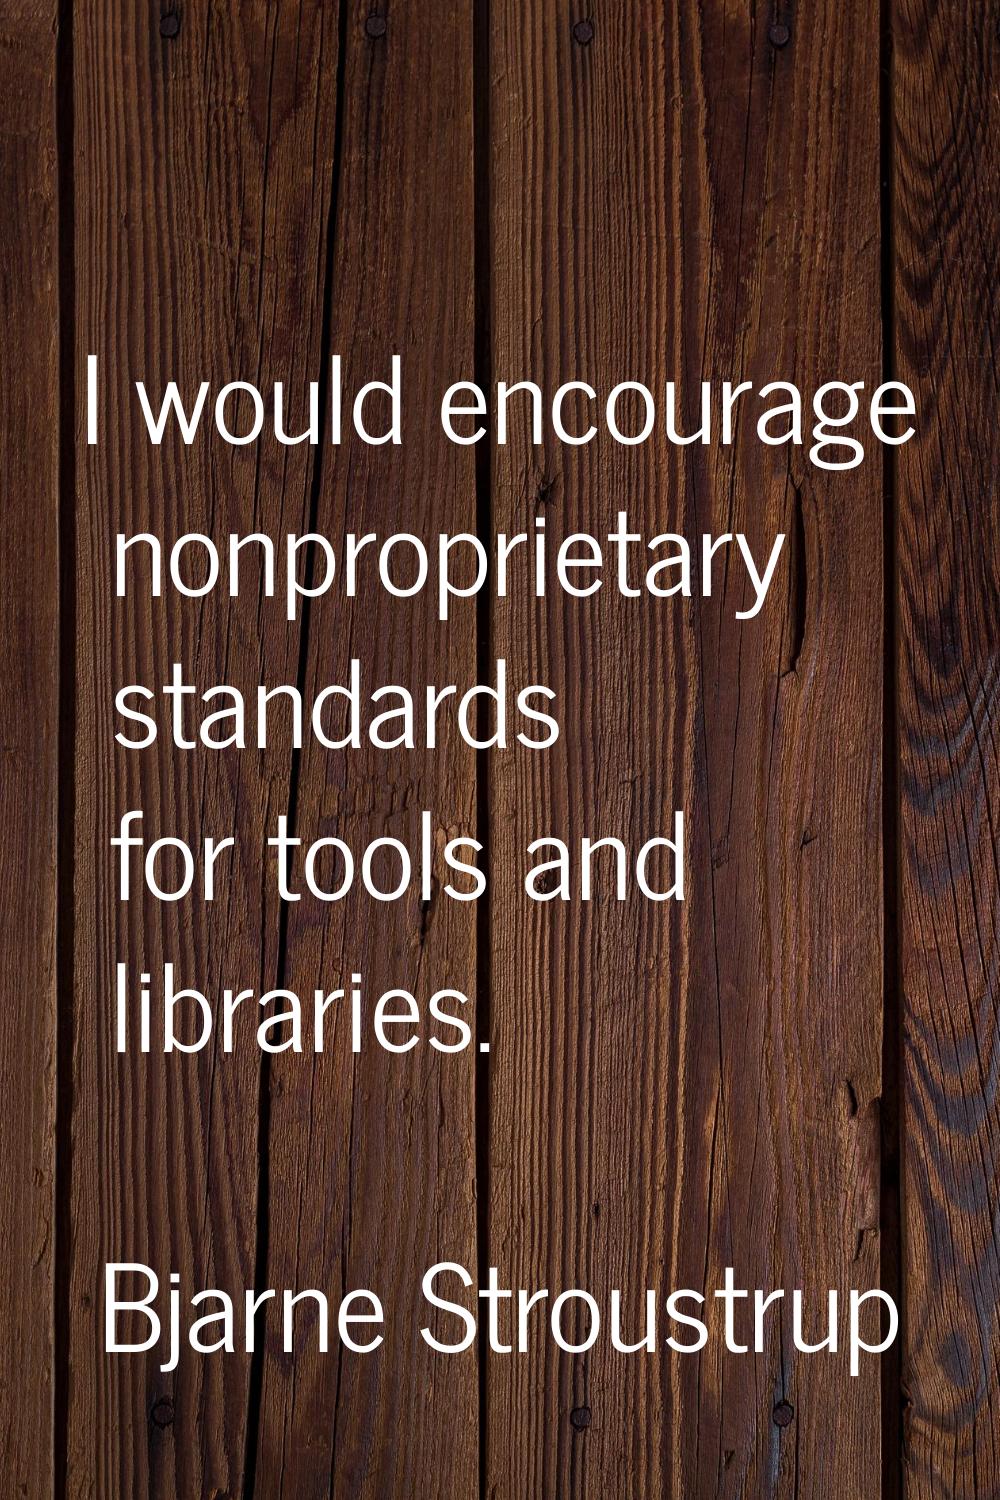 I would encourage nonproprietary standards for tools and libraries.